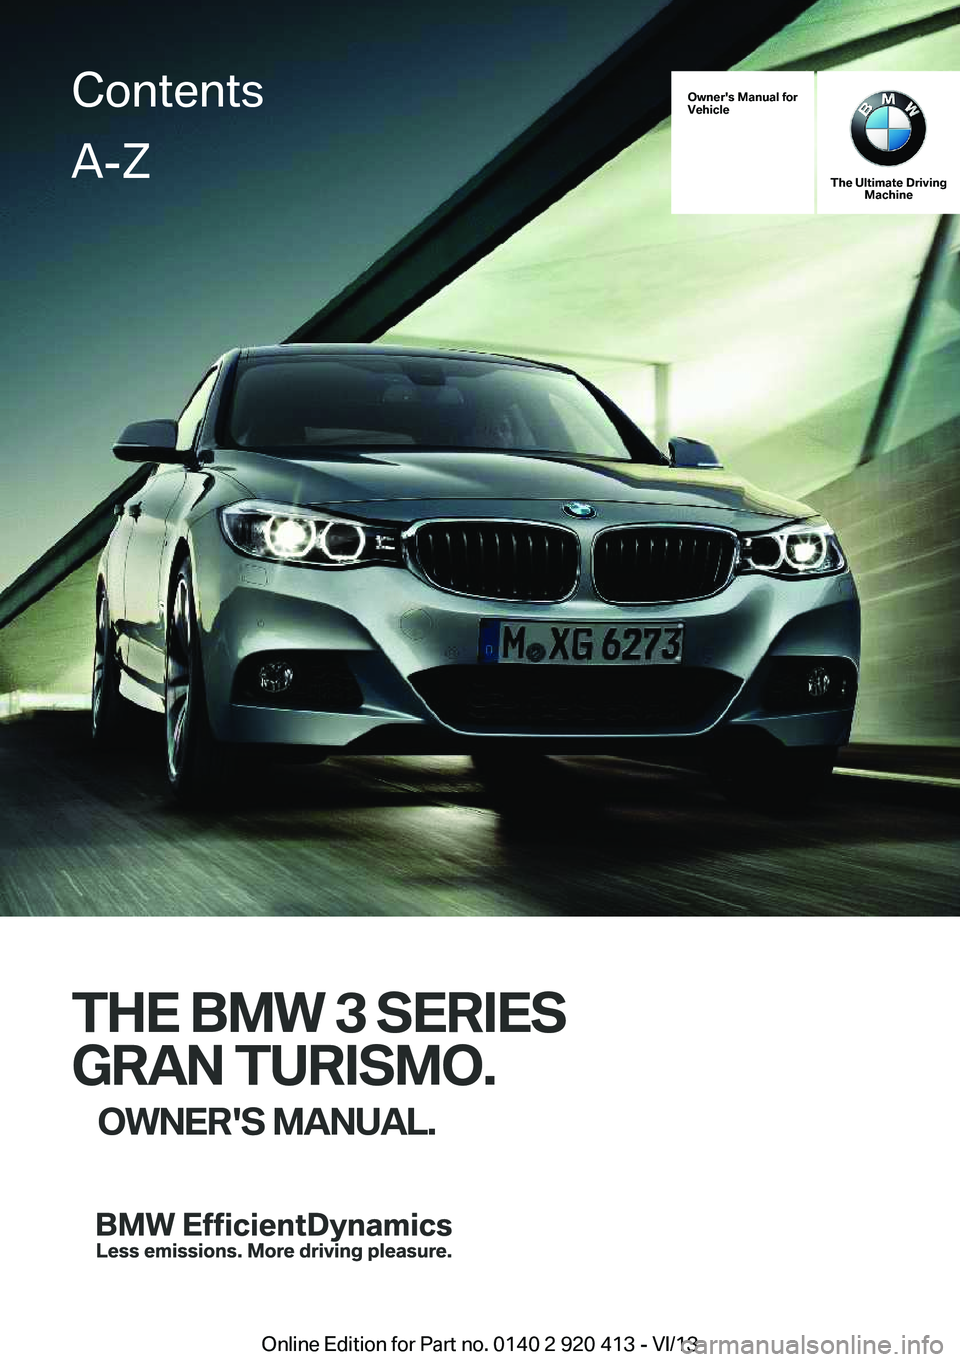 BMW 335I XDRIVE GRAN TURISMO 2014  Owners Manual Owner's Manual for
Vehicle
The Ultimate Driving Machine
THE BMW 3 SERIES
GRAN TURISMO. OWNER'S MANUAL.
ContentsA-Z
Online Edition for Part no. 0140 2 920 413 - VI/13   